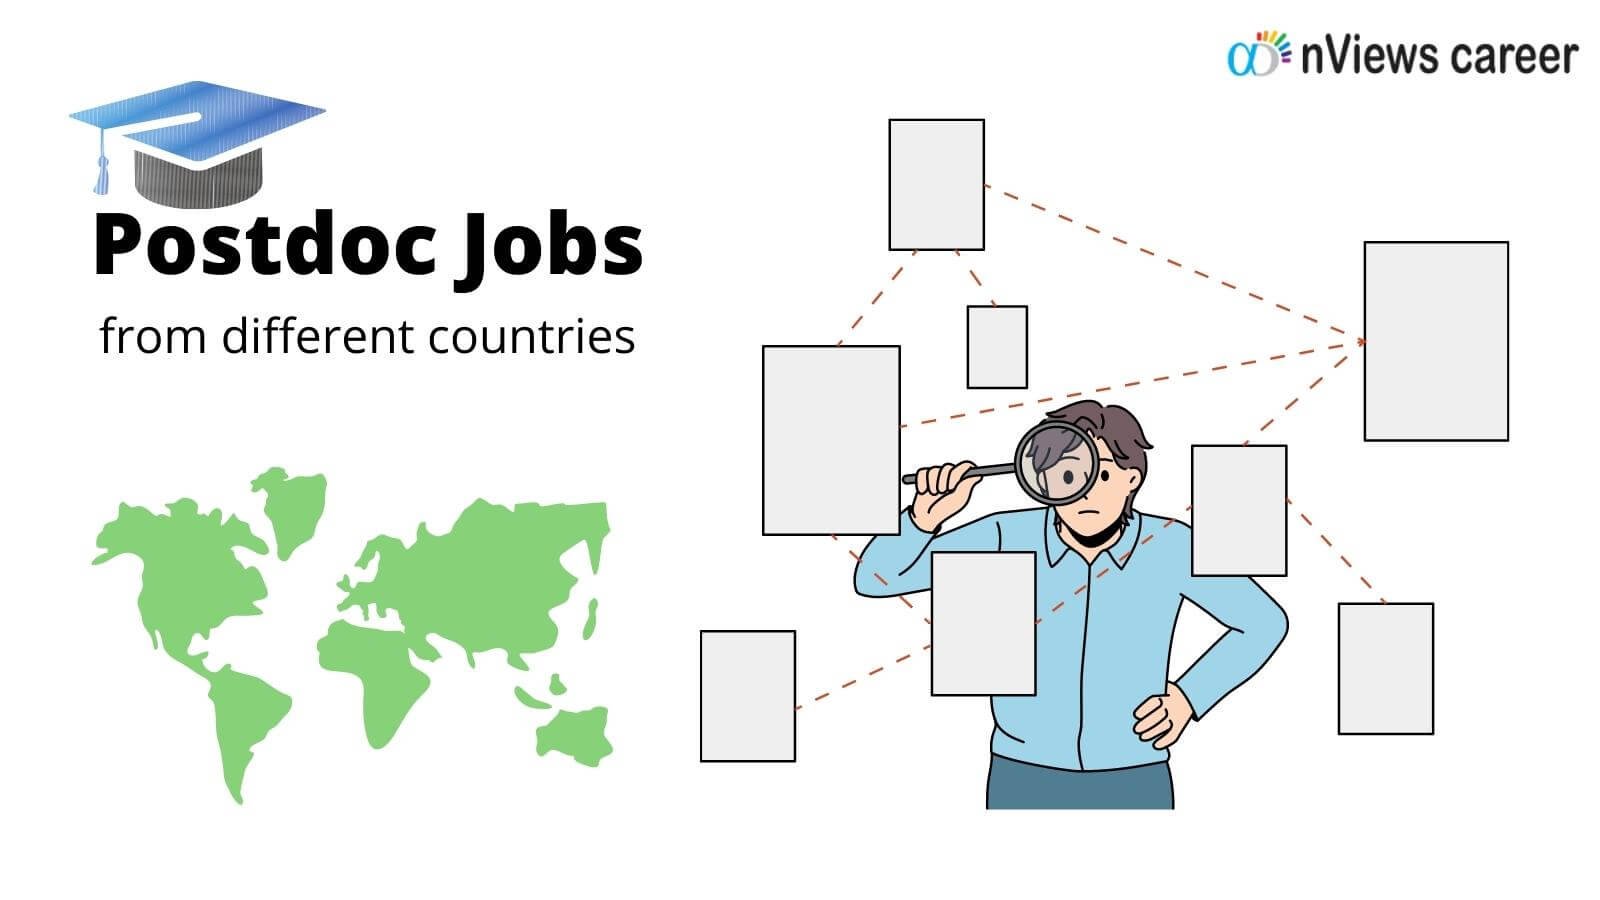 Postdoc jobs/positions are from different countries, Postdoctoral job opportunities for PhDs.